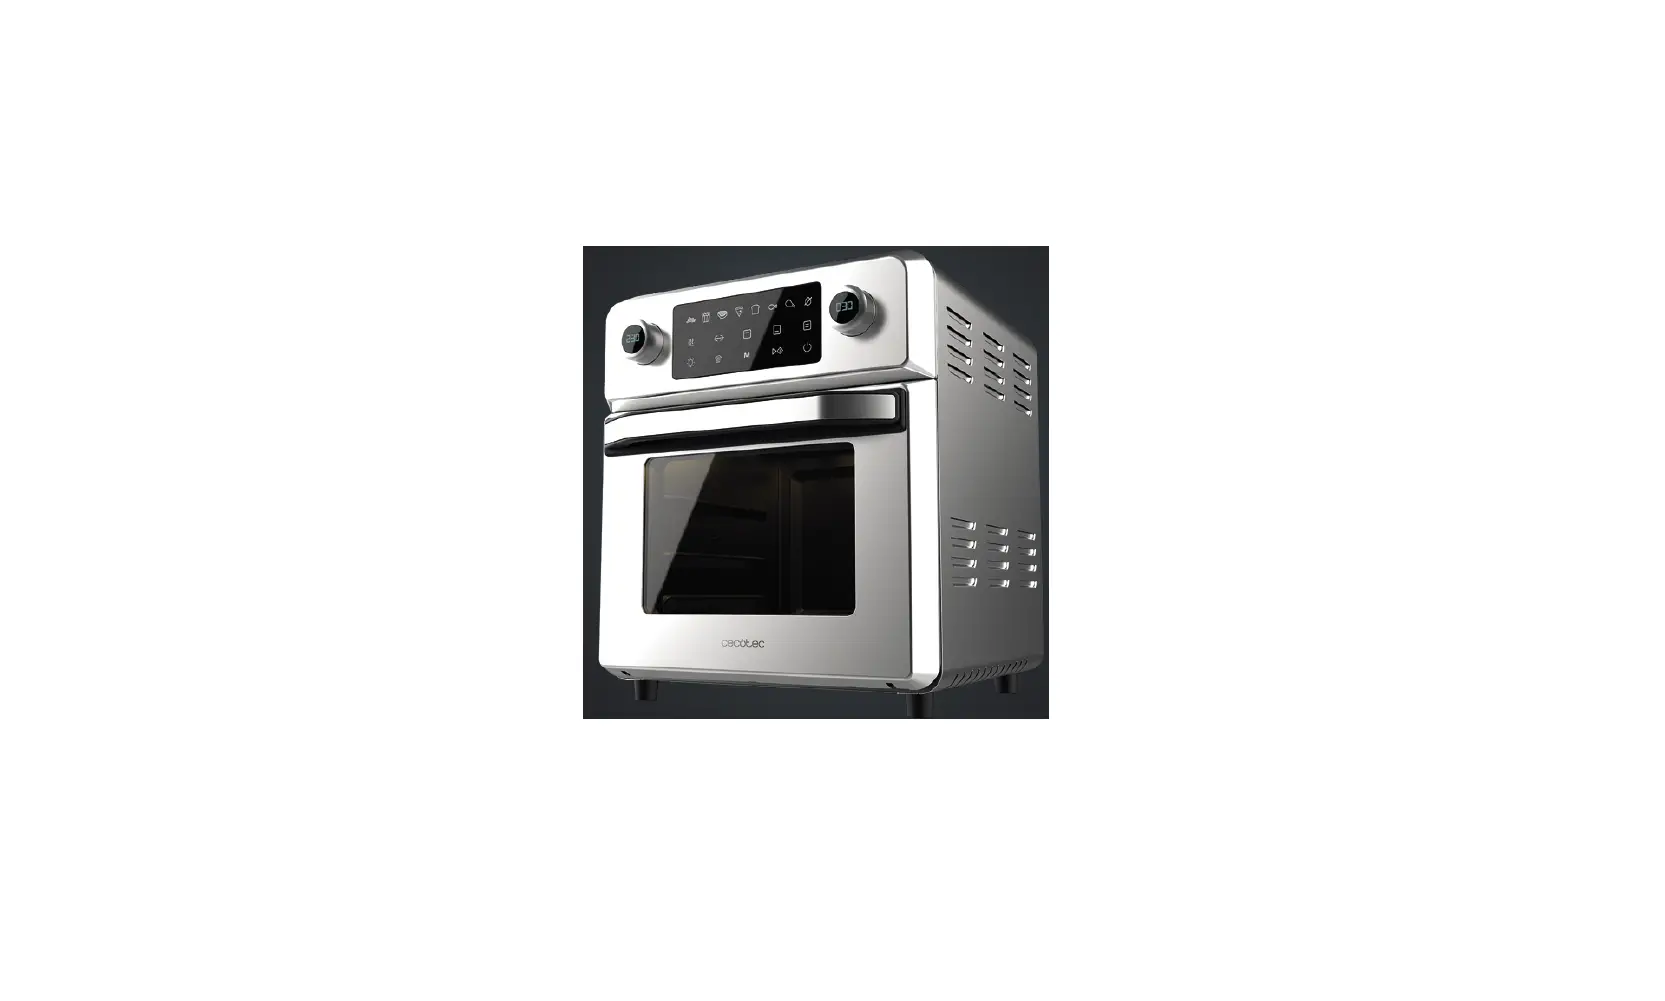 BAKE&FRY 1400 TOUCH STEEL